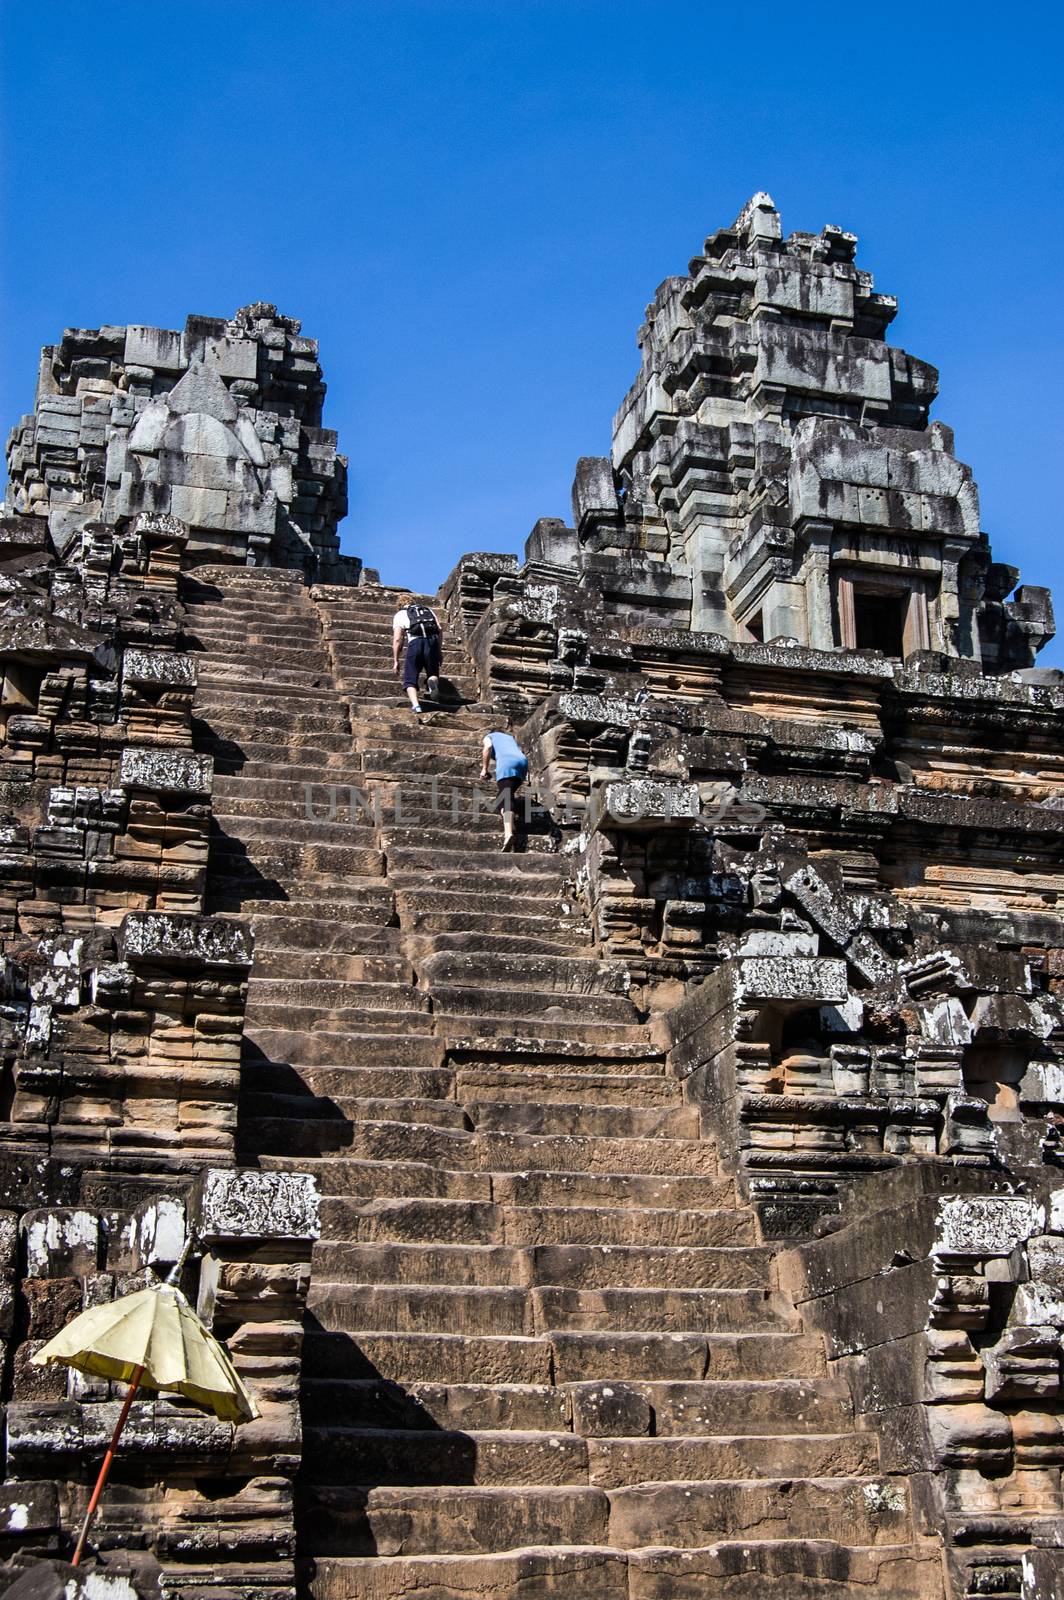 Two tourists Climbing the steep steps to the top of the ancient Khmer Hindu temple at Ta Keo, Angkor, Cambodia.  Built in 985 the steep stairway is designed so that pilgrims are prostrate before the gods.